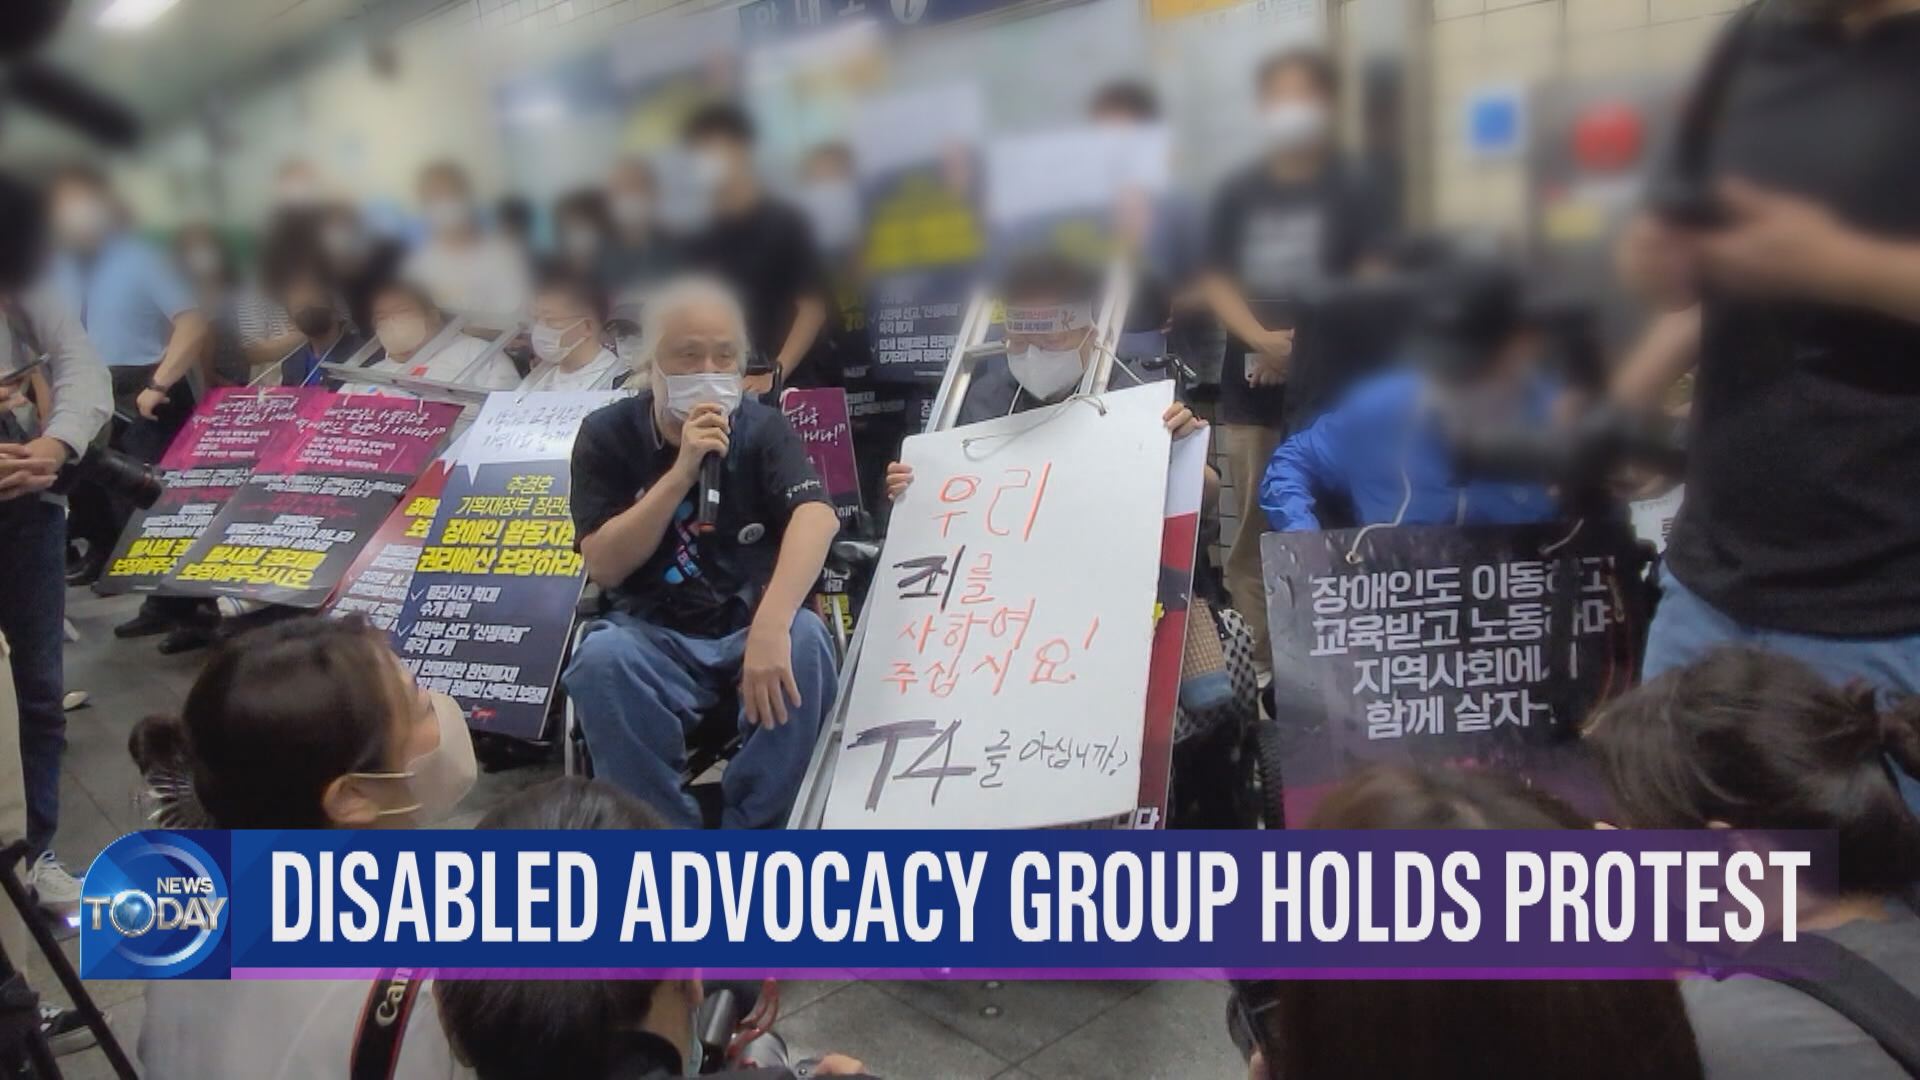 DISABLED ADVOCACY GROUP HOLDS PROTEST